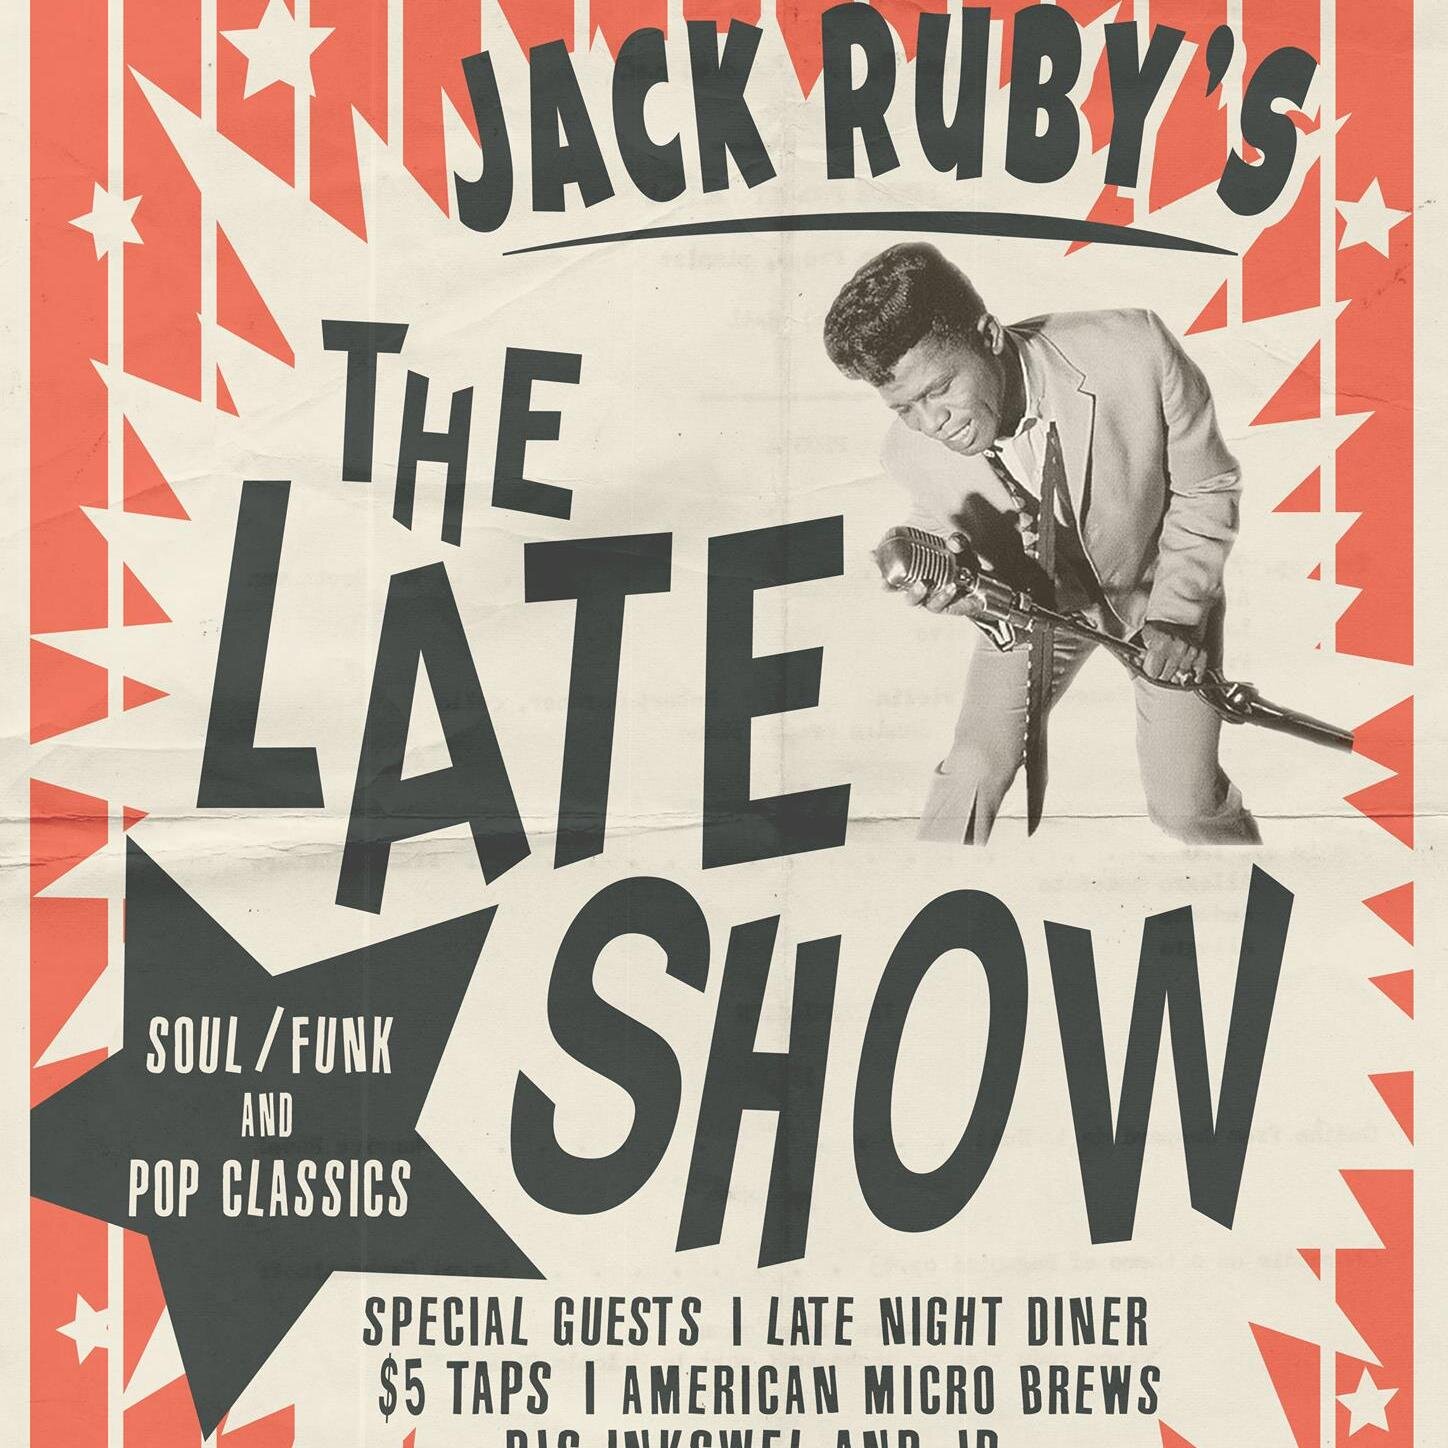 'The Late Show' - with the Jack Ruby House Band.

live music | drink specials | late night dining | special guests

Thursday nights at the Jack Ruby.